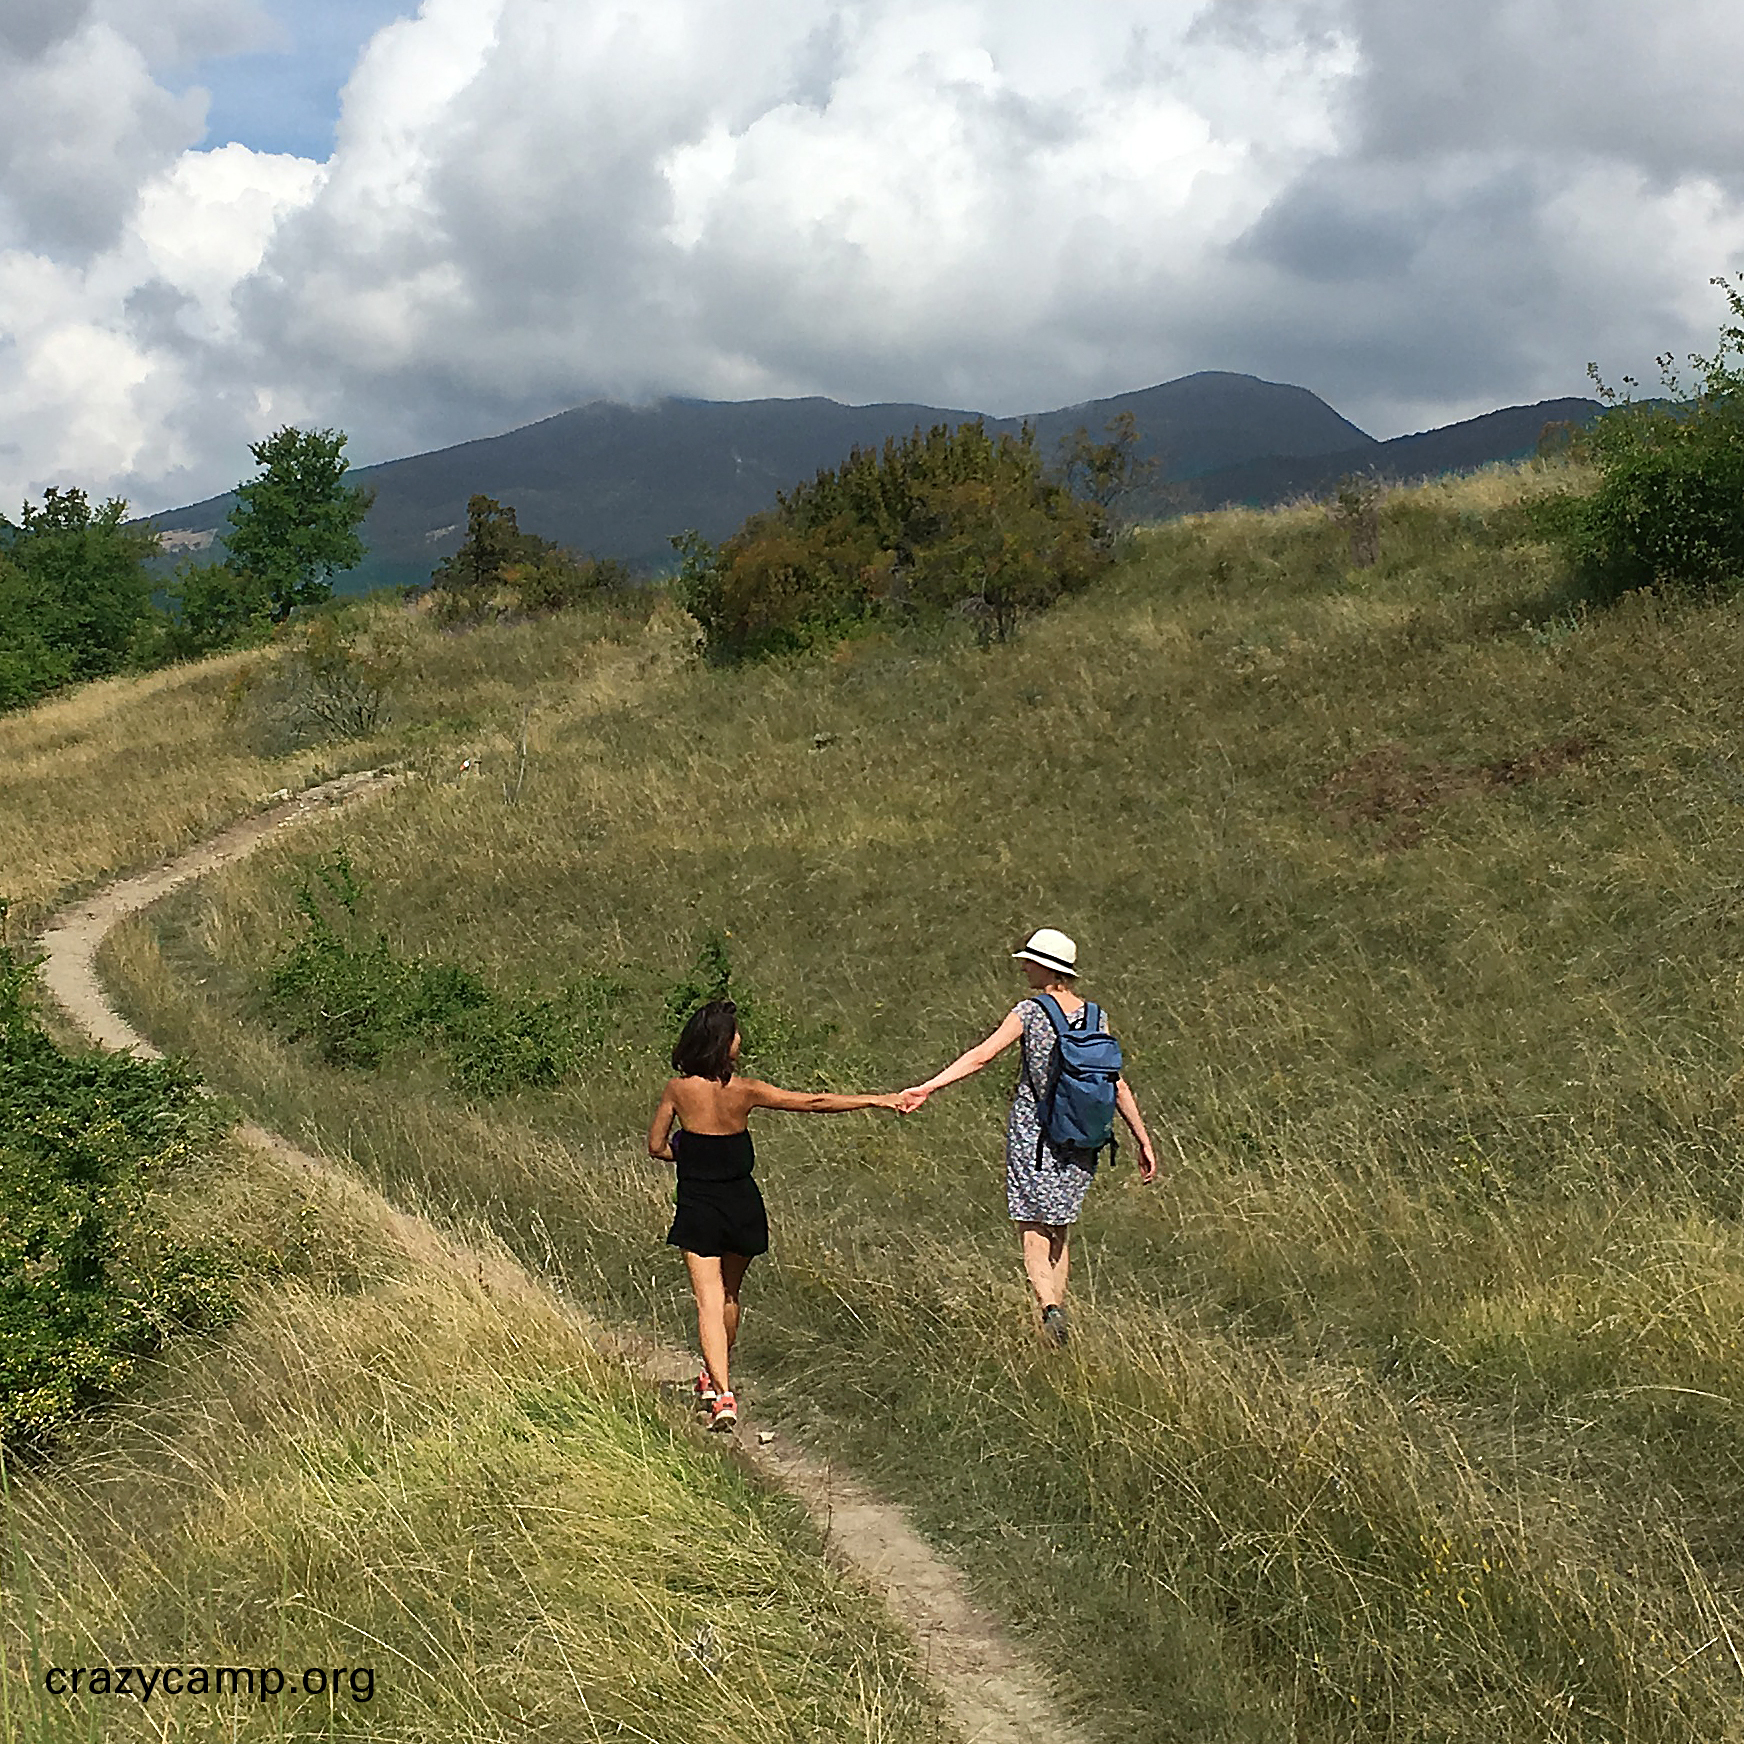 A photo of two women, holding hands while hiking